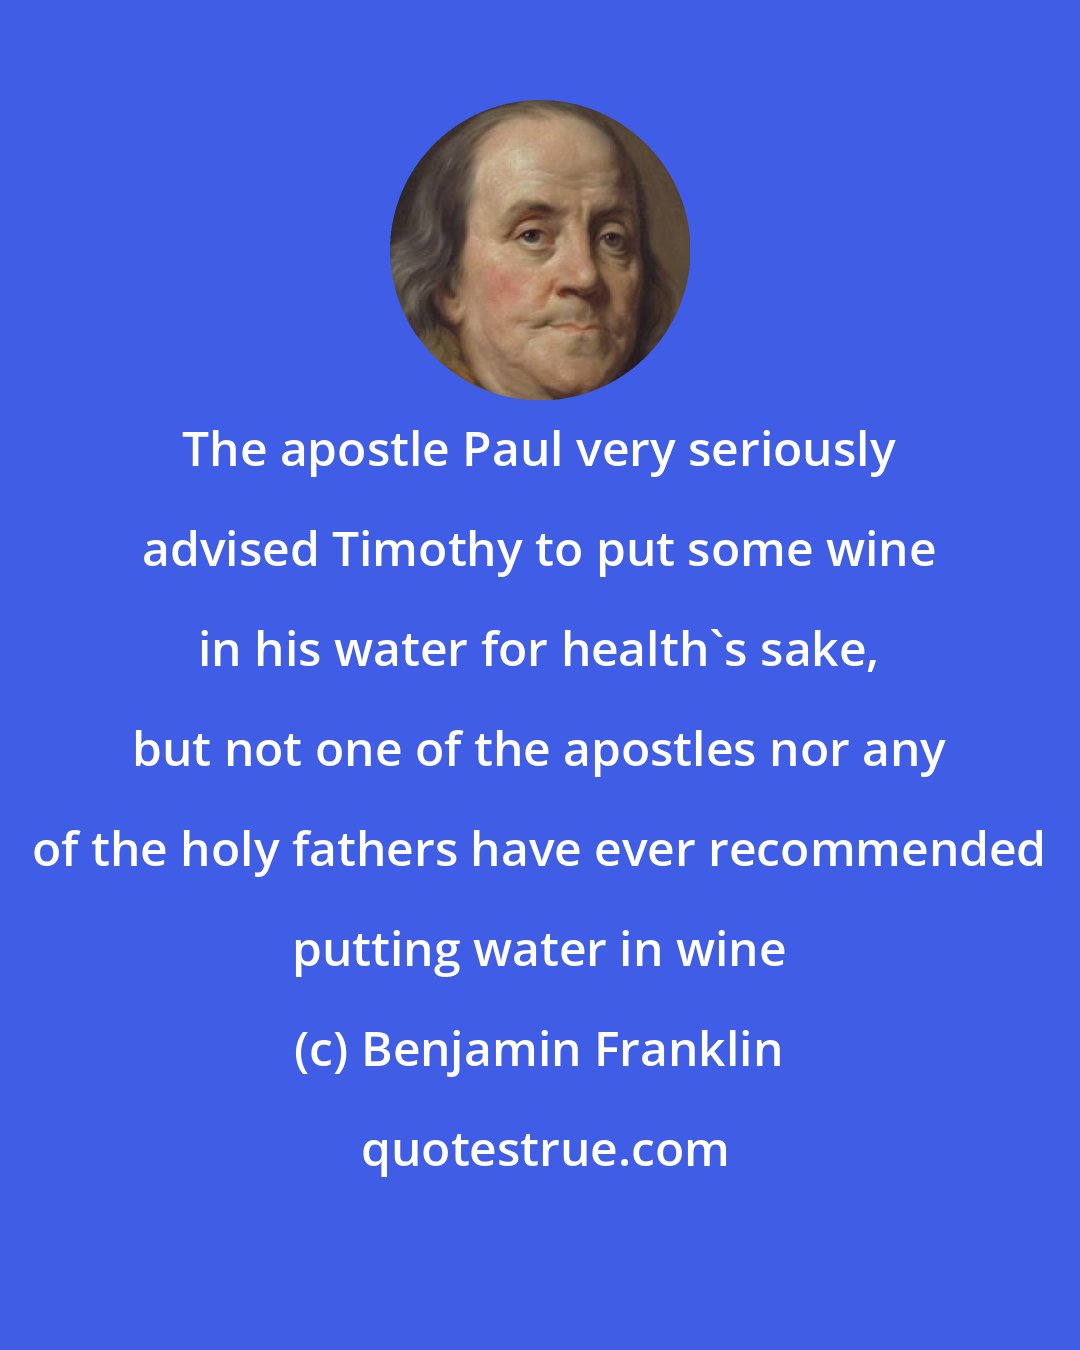 Benjamin Franklin: The apostle Paul very seriously advised Timothy to put some wine in his water for health's sake, but not one of the apostles nor any of the holy fathers have ever recommended putting water in wine